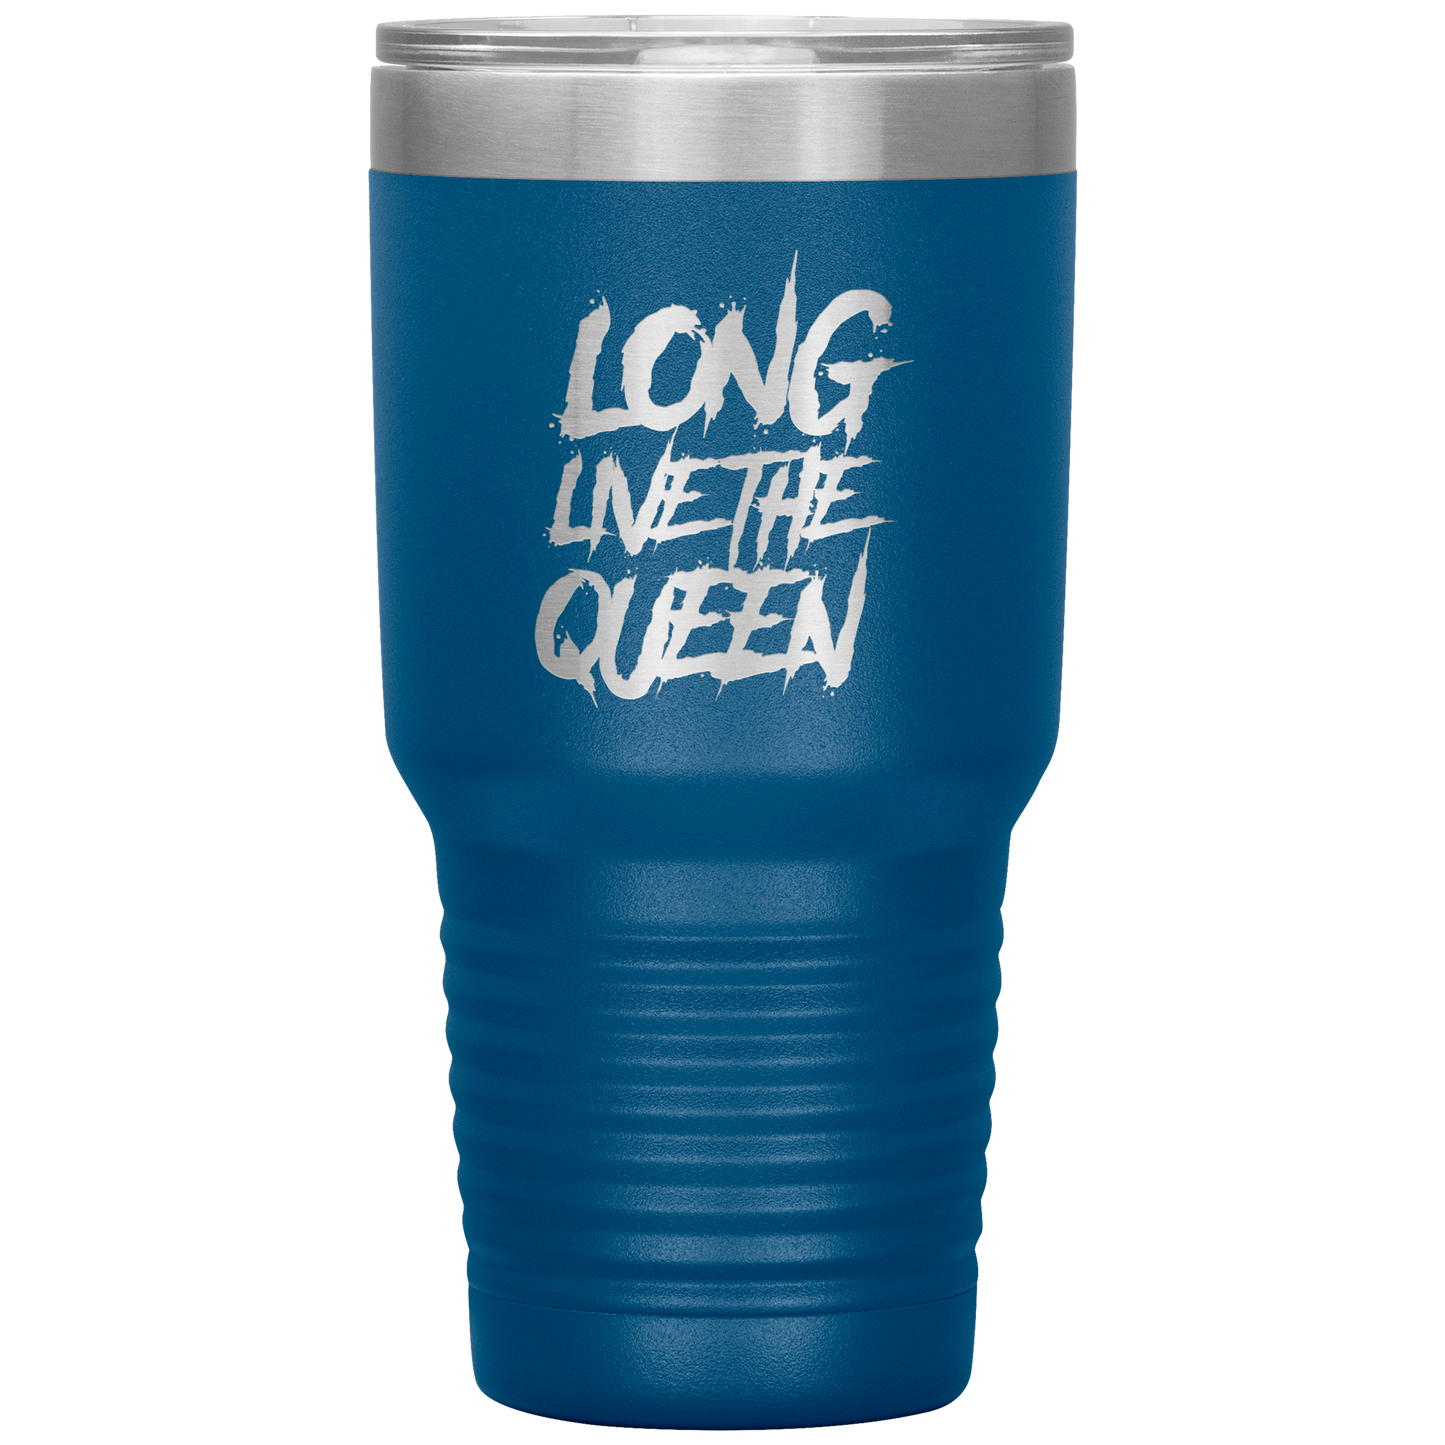 LONG LIVE THE QUEEN SAYING TUMBLER